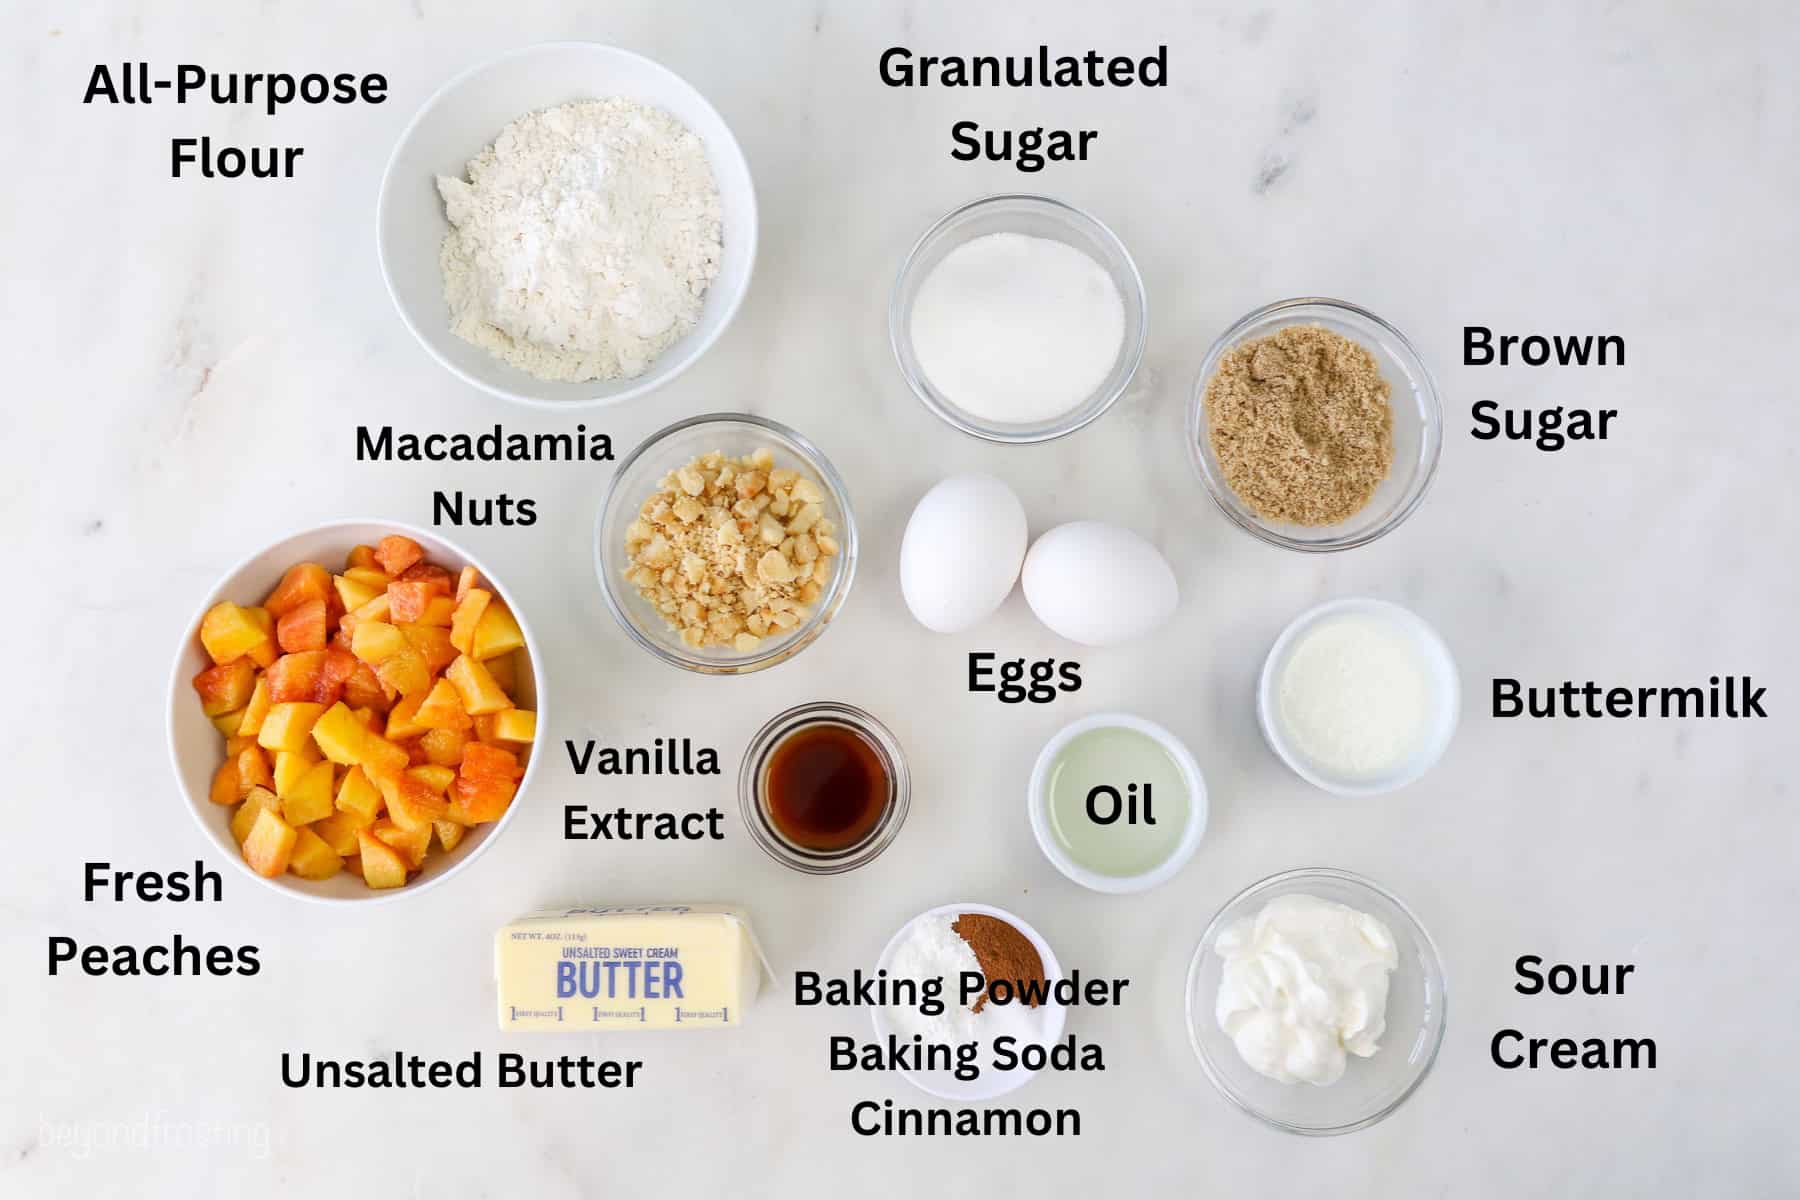 Ingredients for peach macadamia nut muffins with text labels over each ingredient.